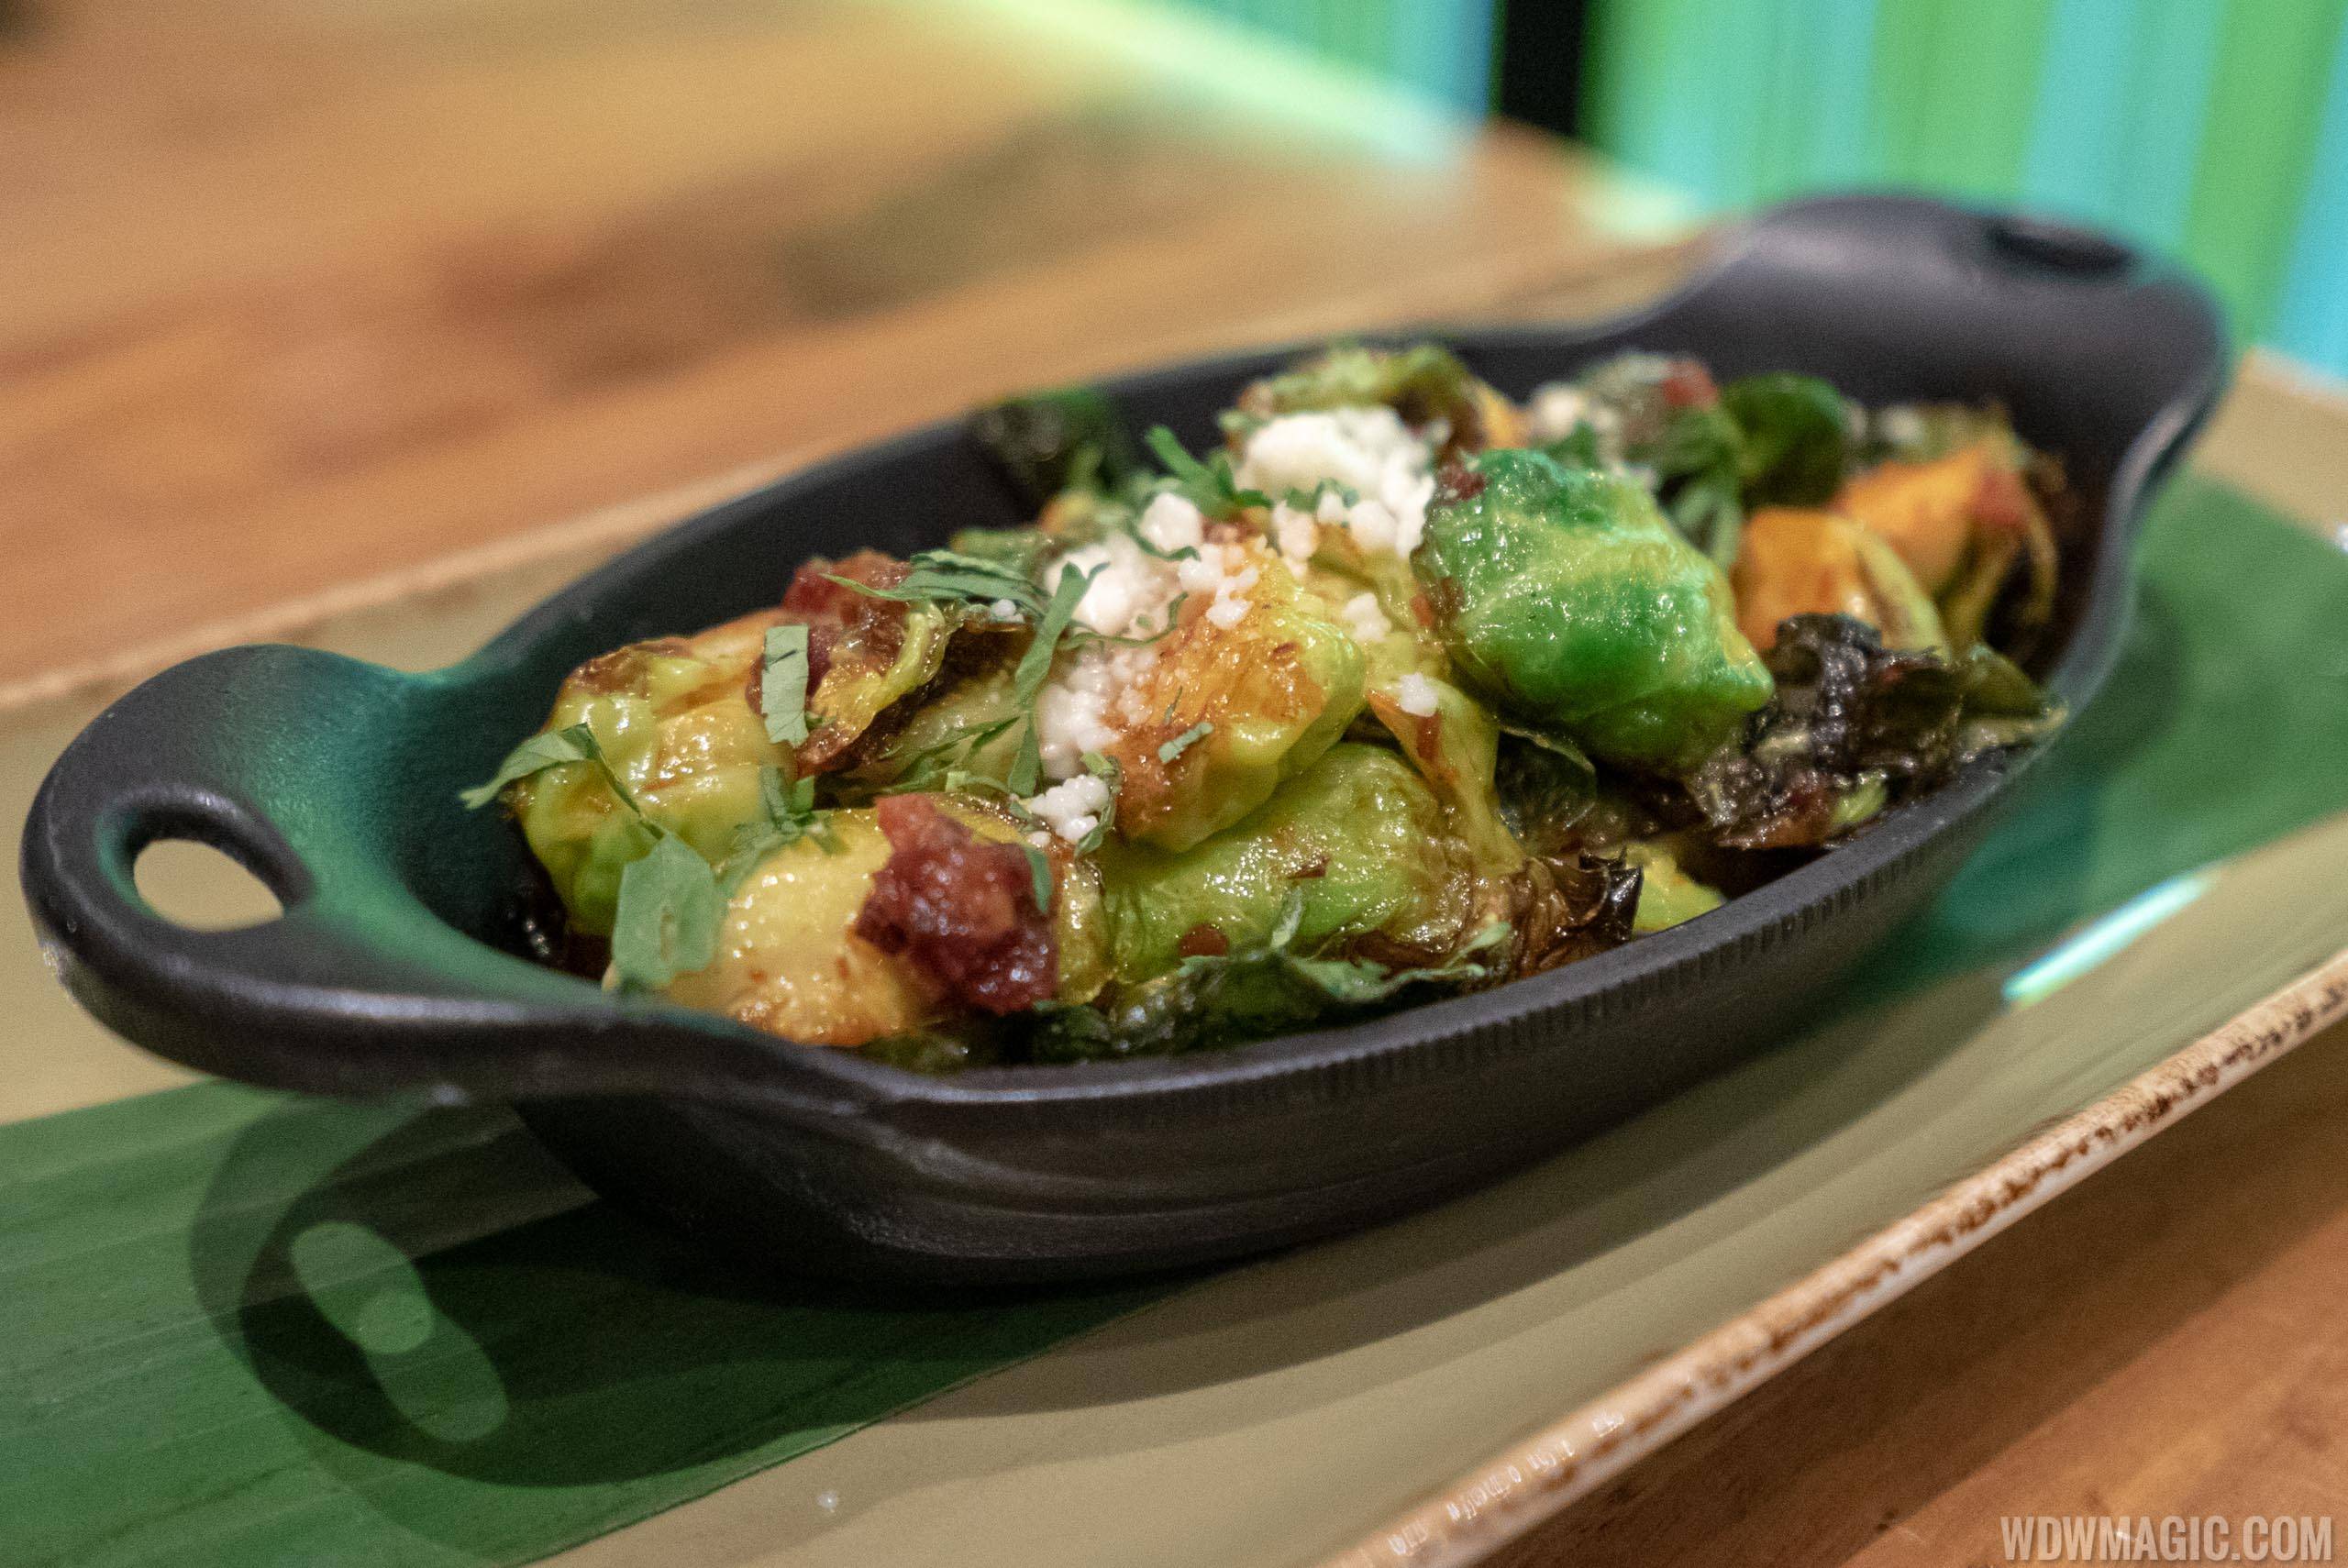 Frontera Cocina - Taste of Mexico City - Three Chile Roasted Brussels Sprouts